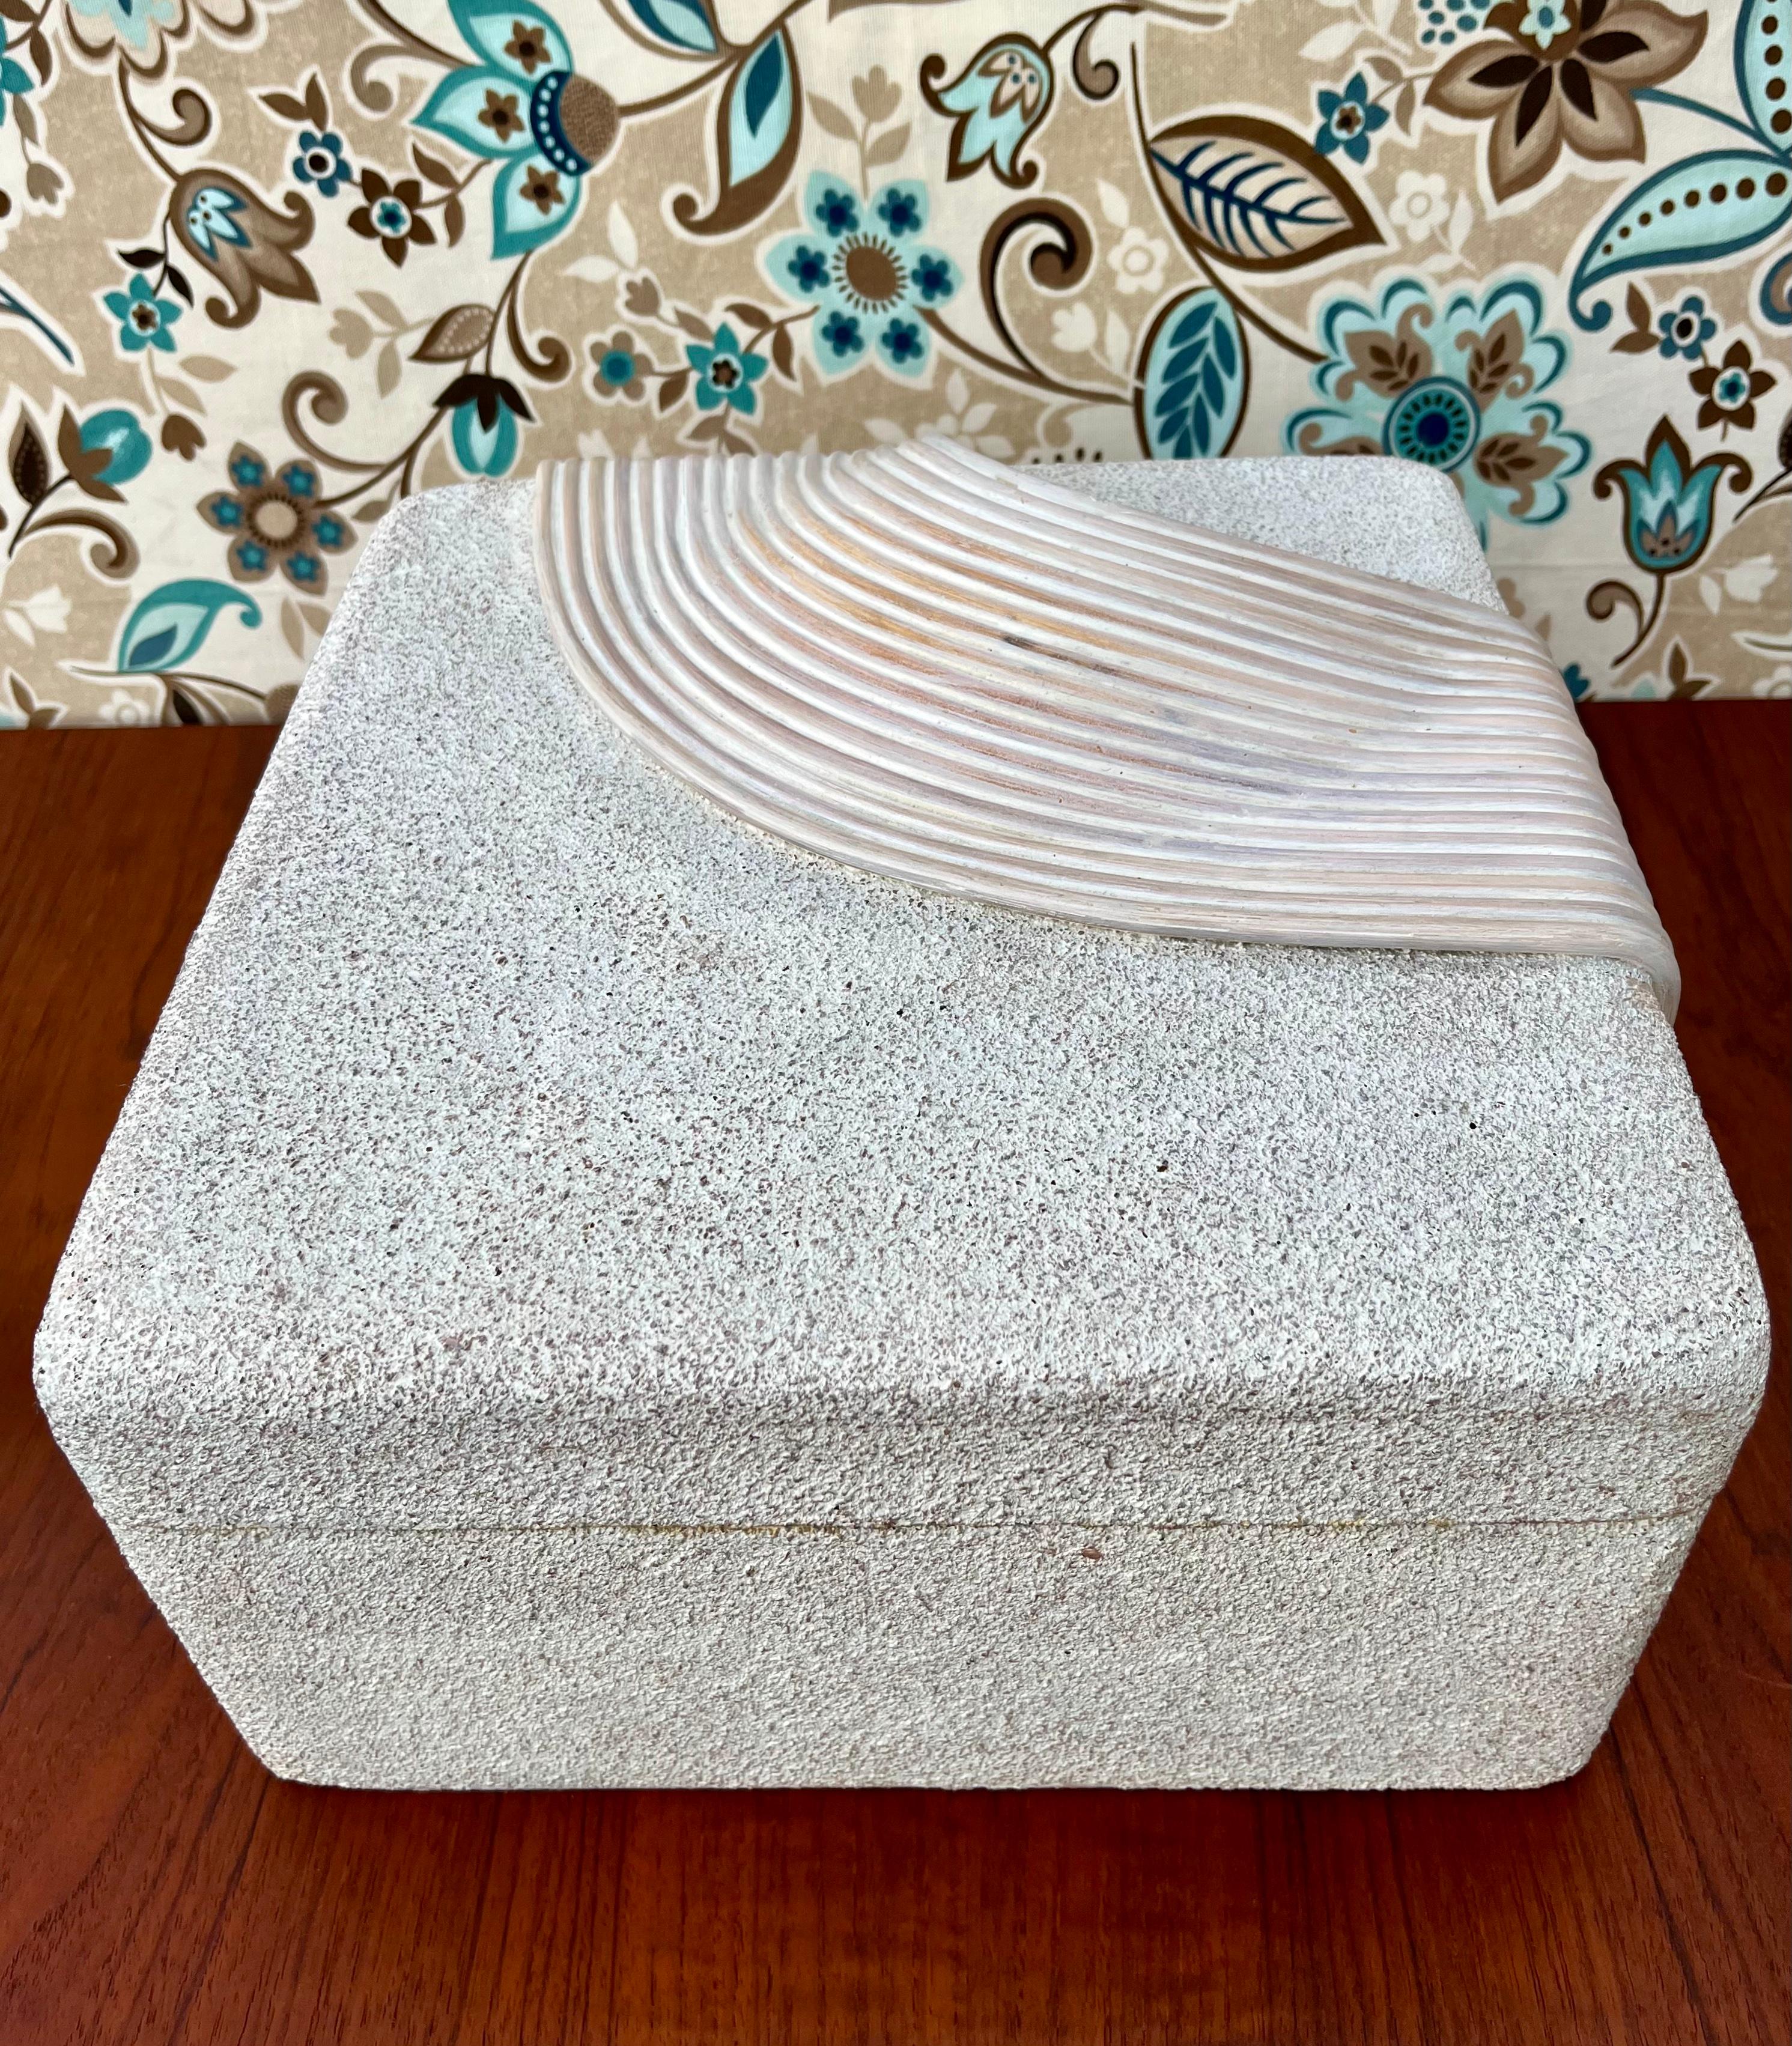 Vintage Post Modern Split Reed Decorative Jewelry Box in the Betty Cobonpue Style. Circa 1980s. Unsigned
Features a split reed gracefully curved detail over a textured stone frame with a solid wood interior. 
In excellent original condition, with